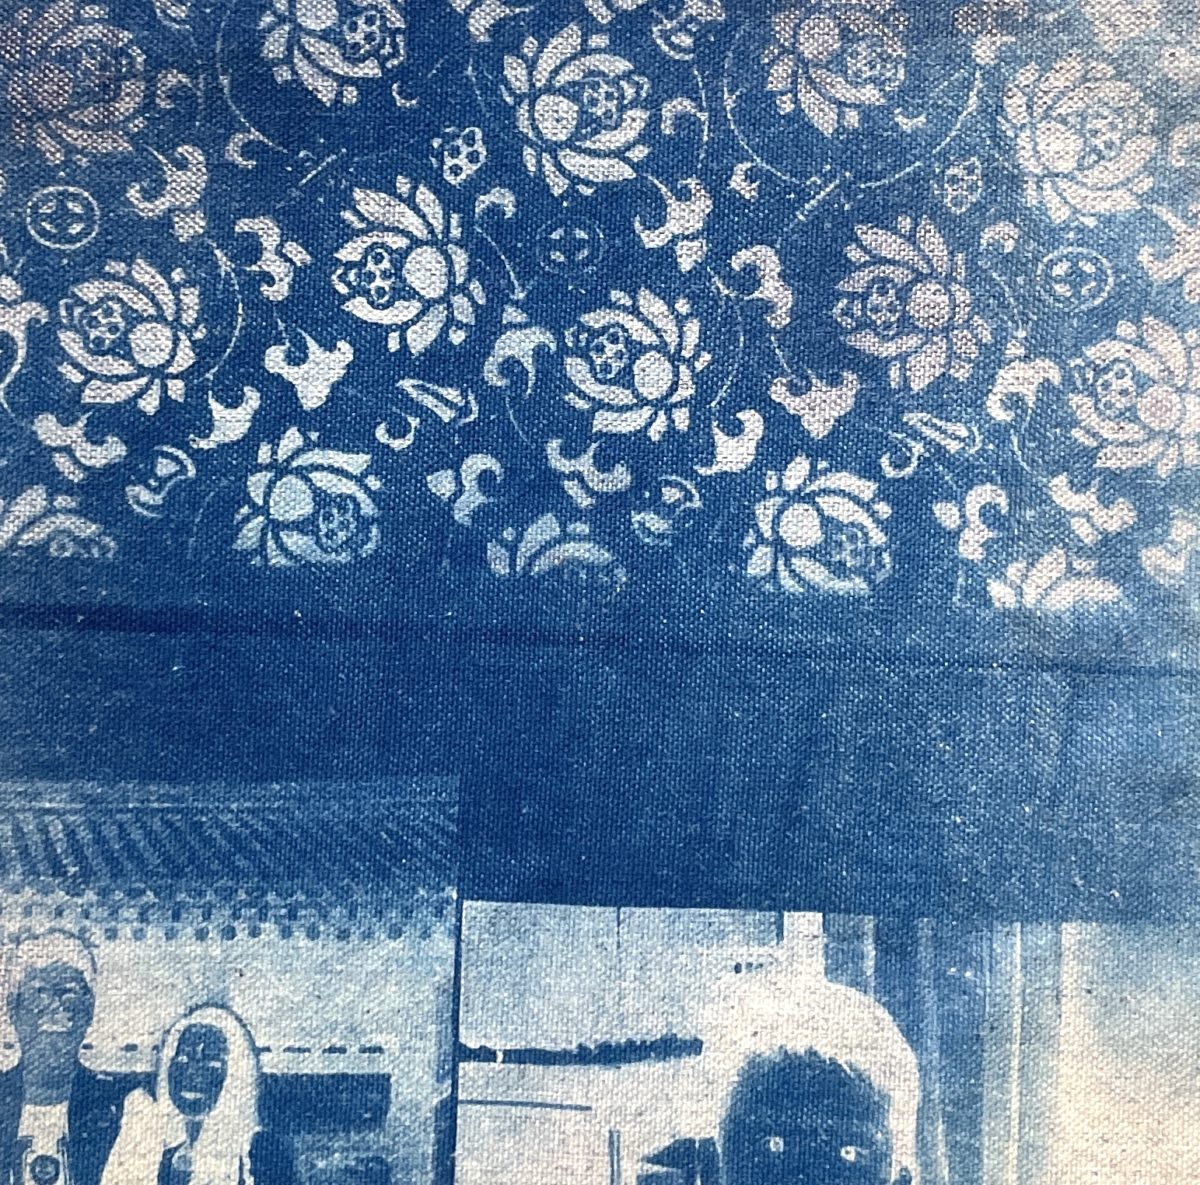 Blue and white collage including a floral pattern and three figures.